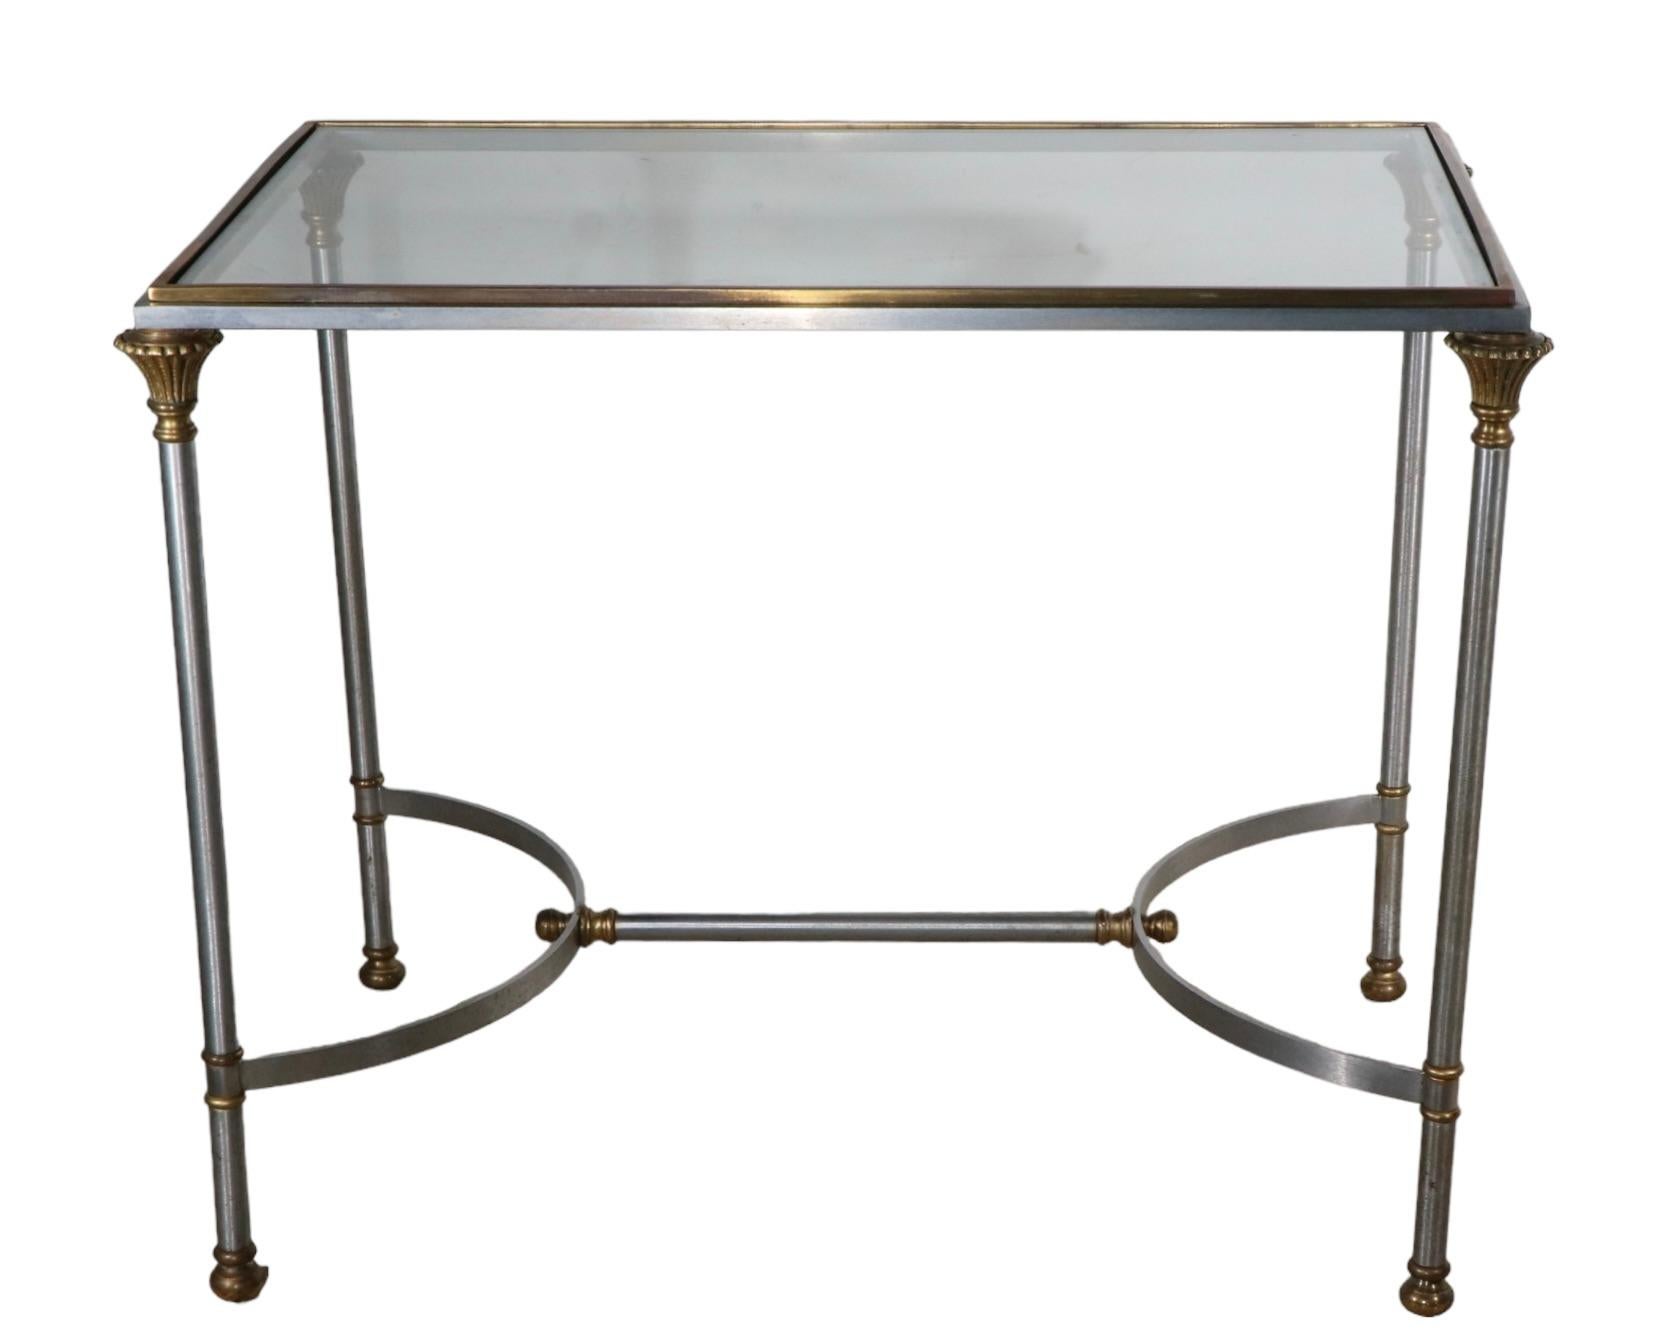 Neoclassical Revival   Classical Steel Brass and Glass End Table Made in Italy att. to  Maison Jansen For Sale